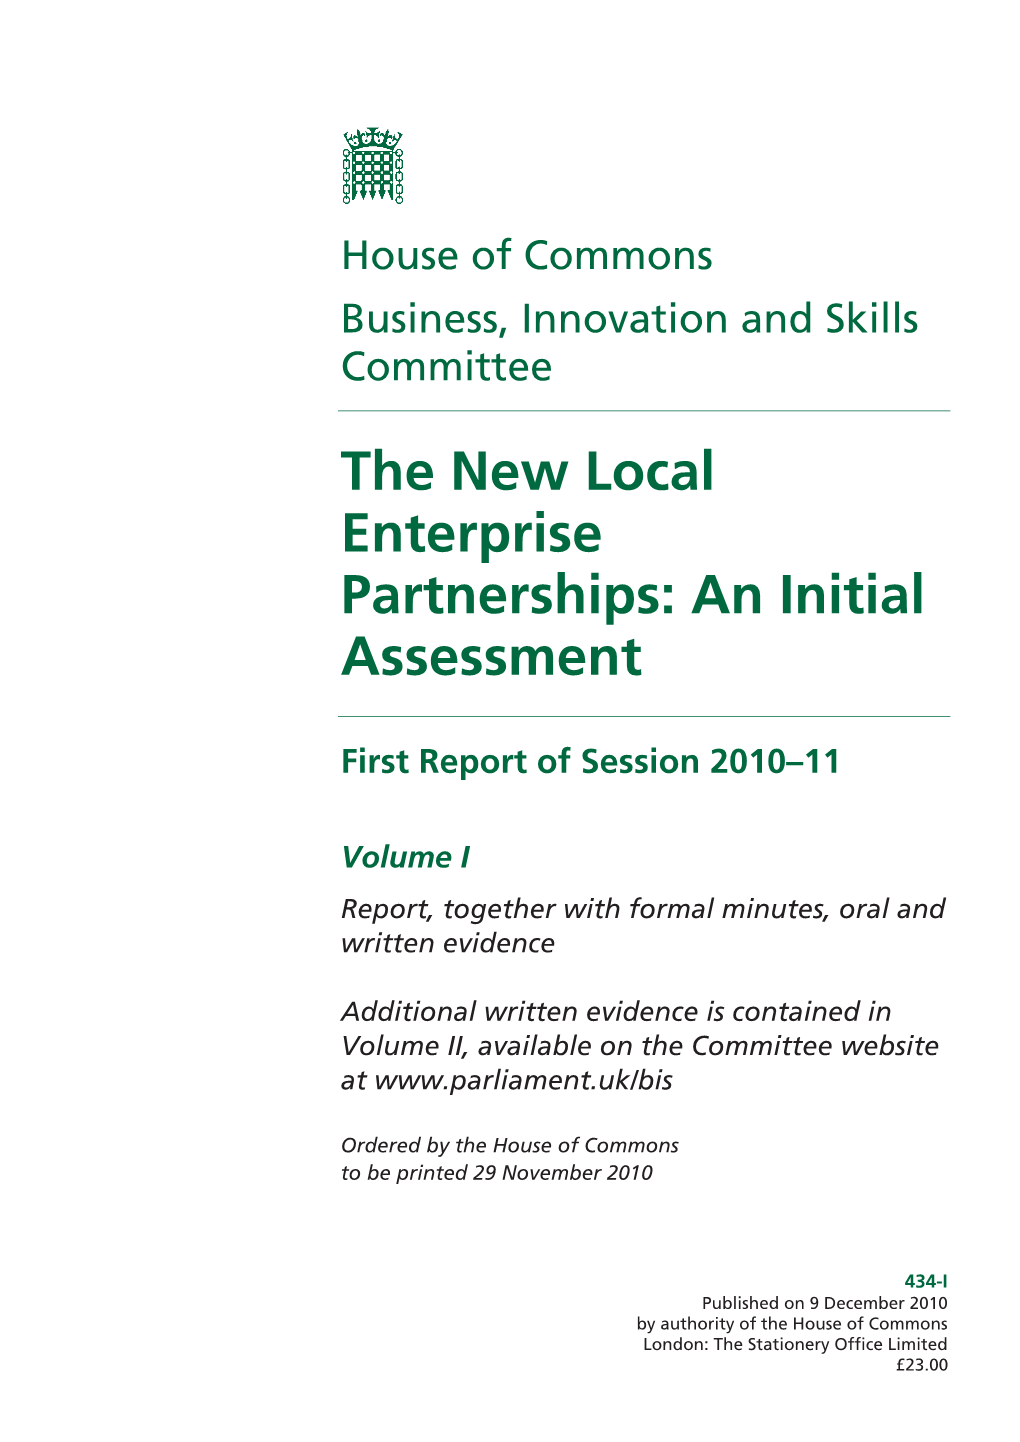 The New Local Enterprise Partnerships: an Initial Assessment